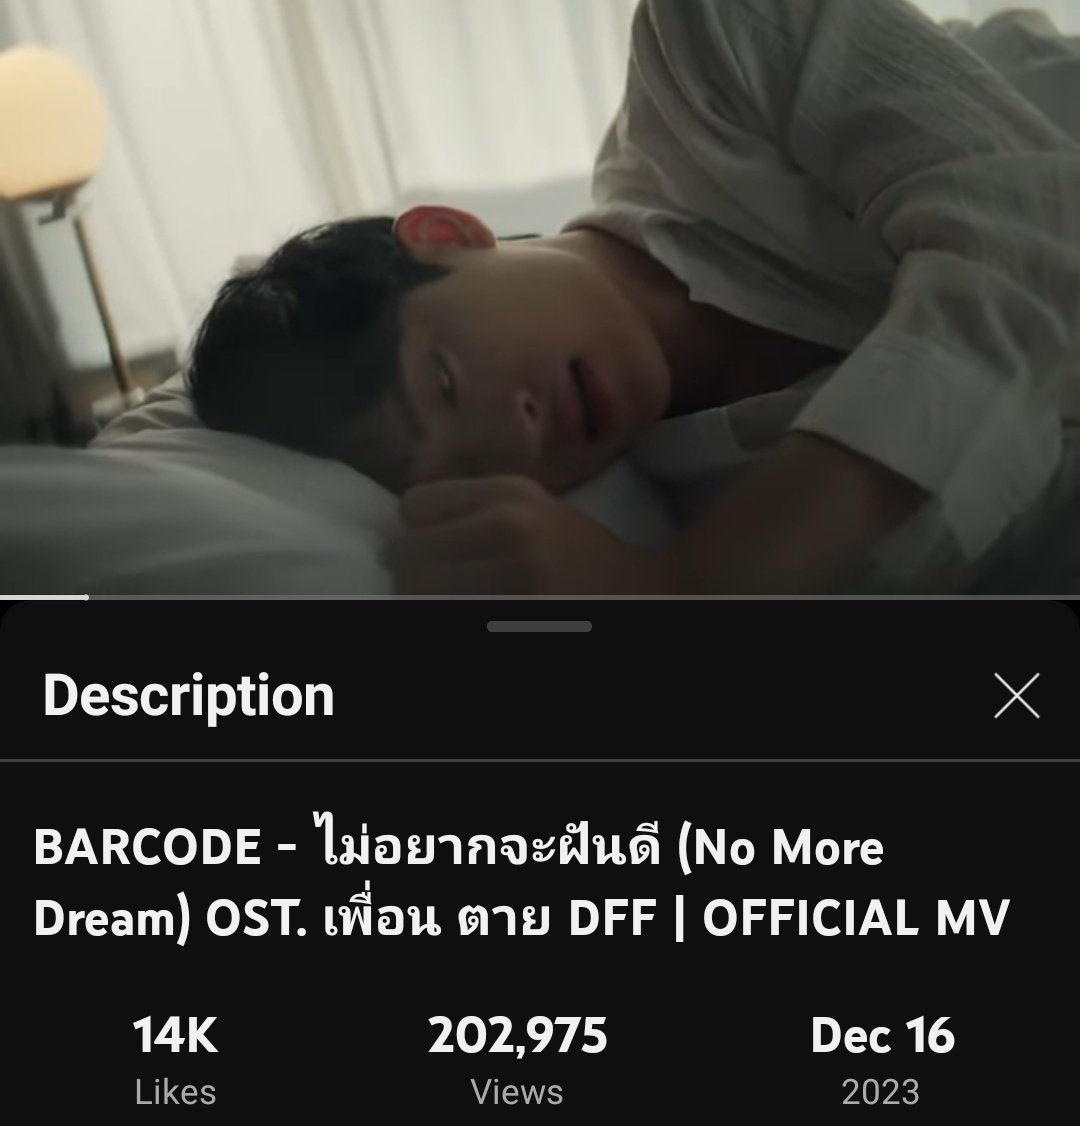 No More Dream will always have a very special spot in our hearts and that will never change. 💜

🎵NMD Streaming Party🎵

#StreamBarcodeNMD
#barcodetin #Unit
@BarcodeTin